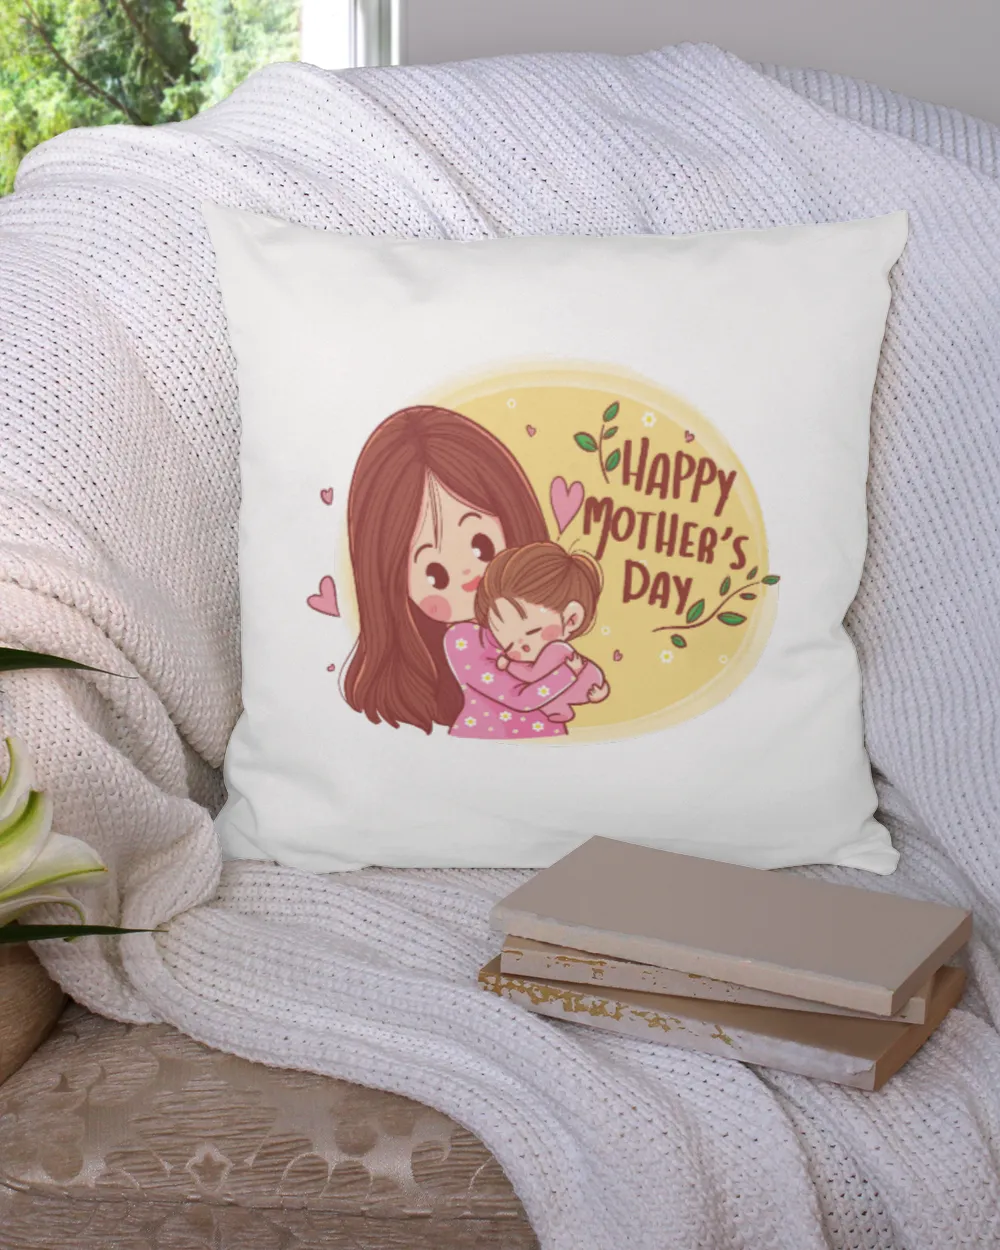 Happy mother's day with pillow